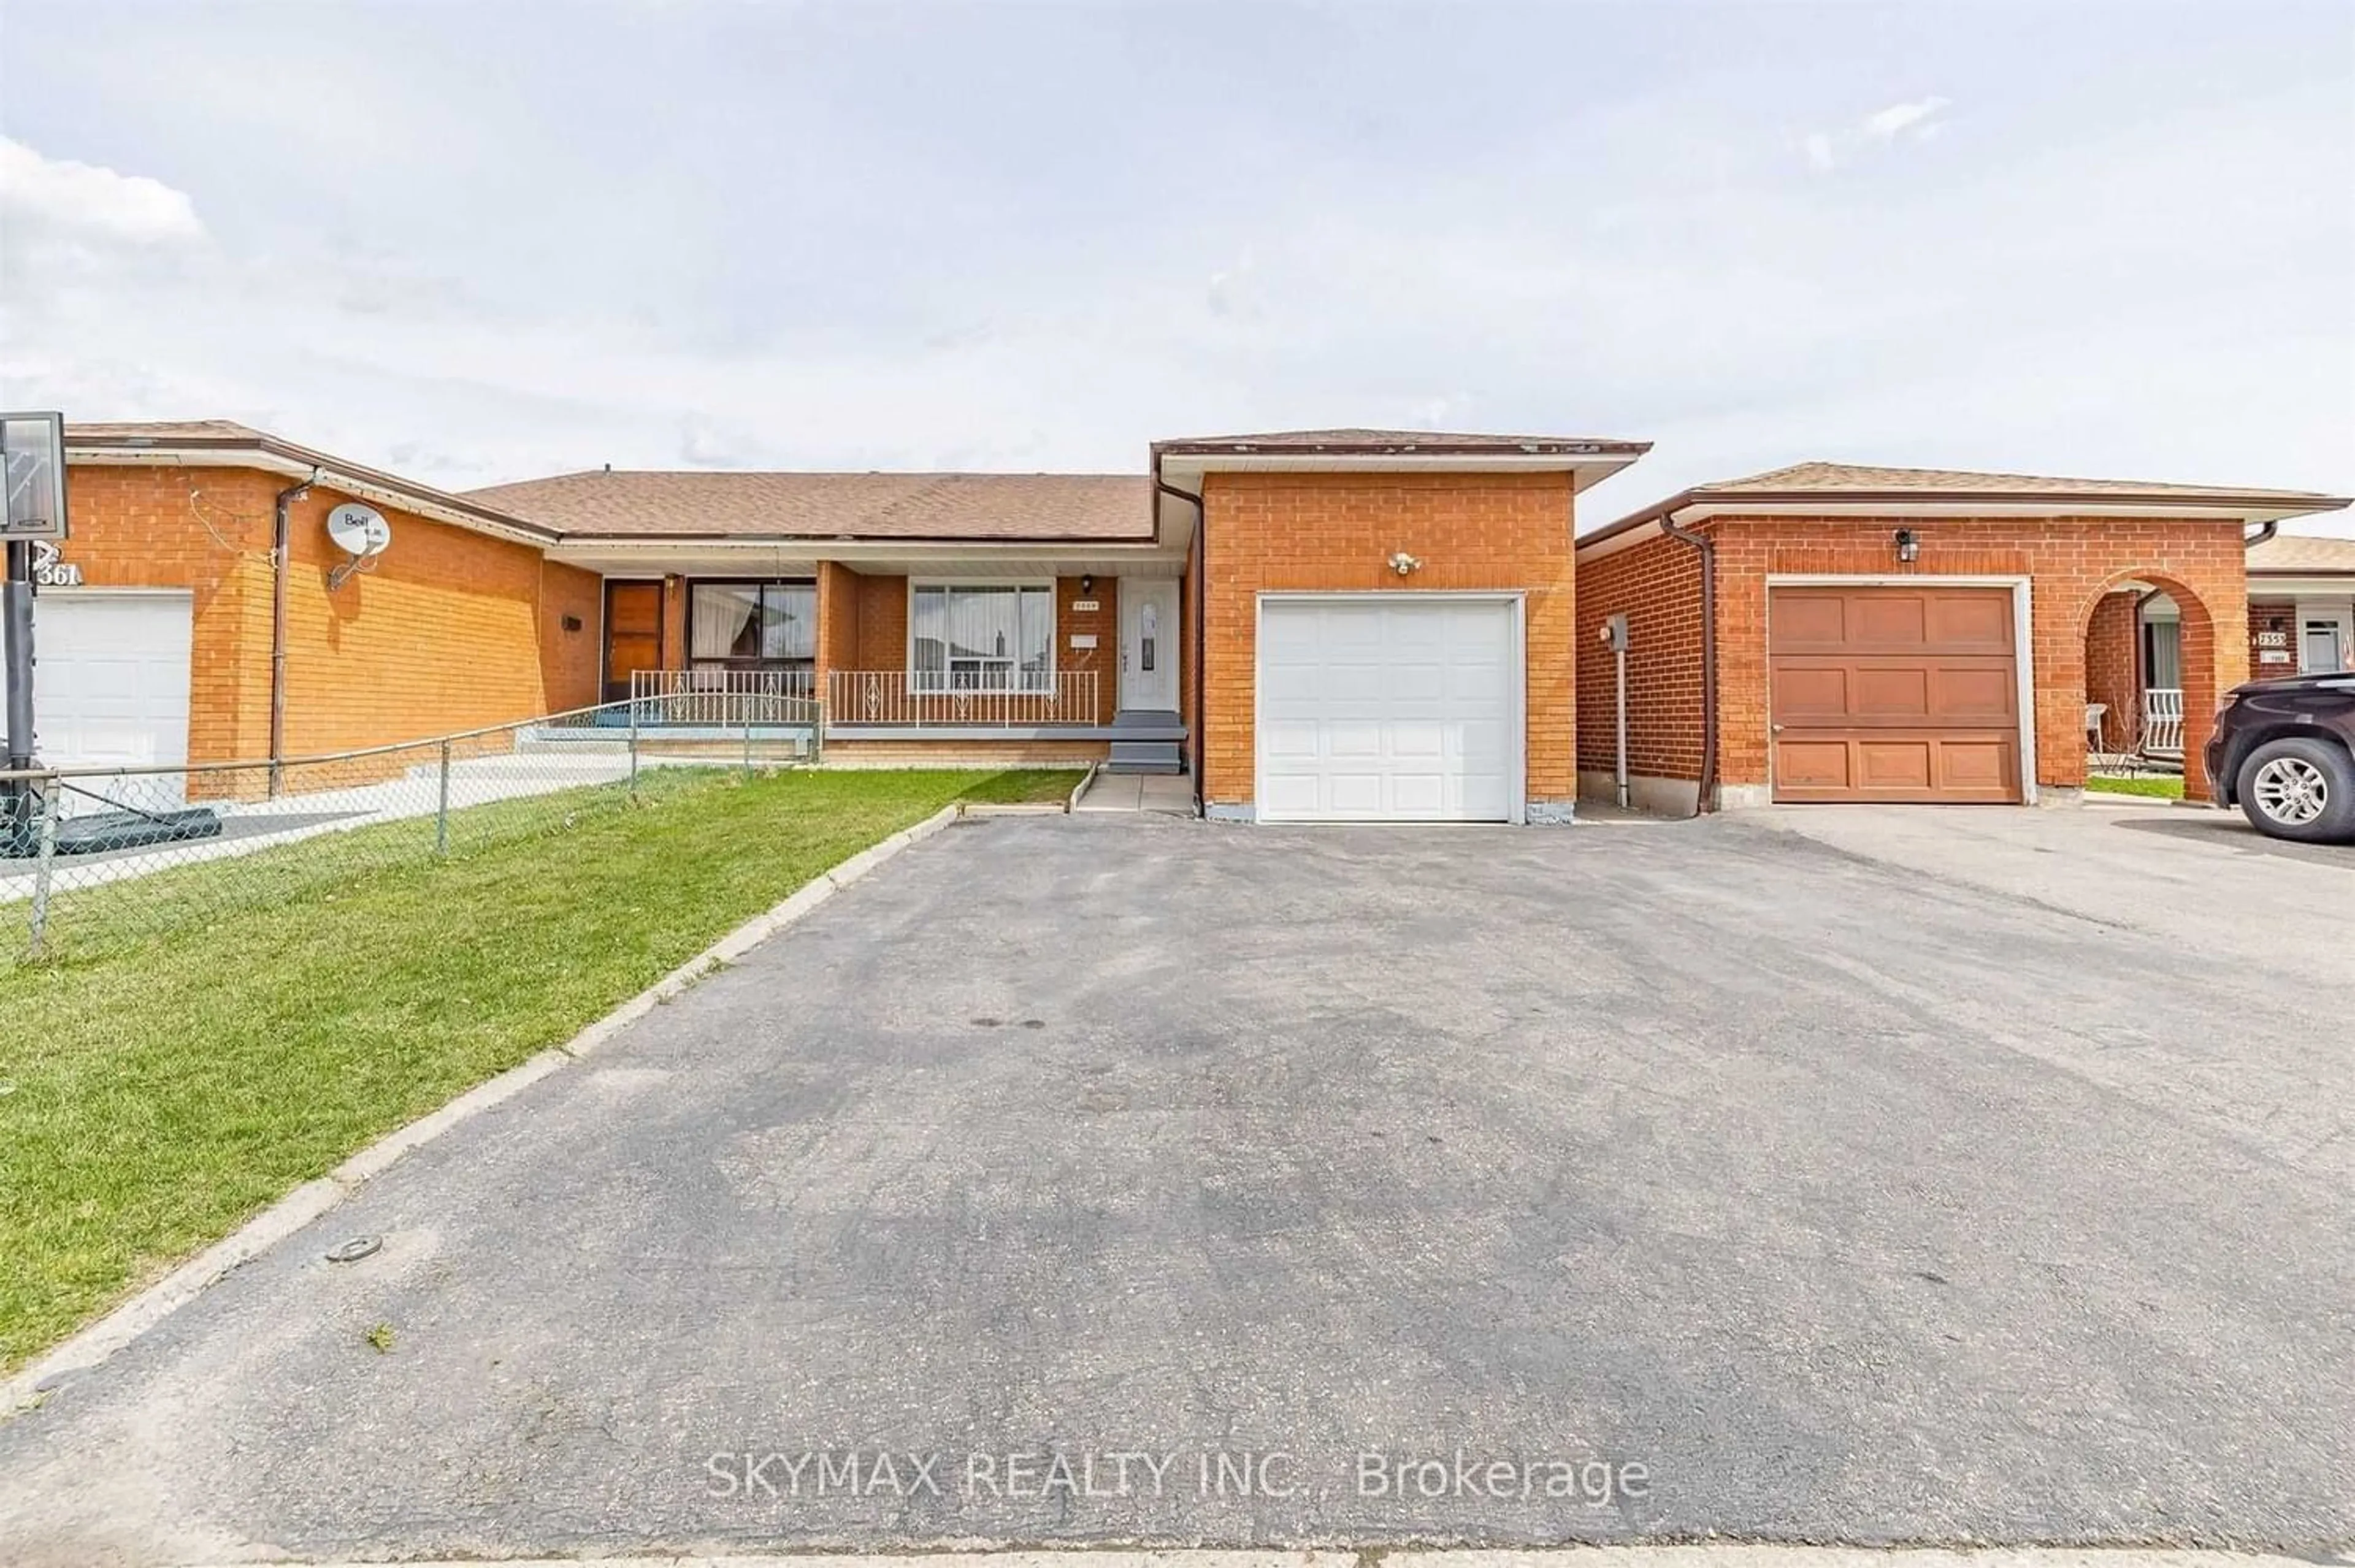 Frontside or backside of a home for 7359 Sigsbee Dr, Mississauga Ontario L4T 3S5